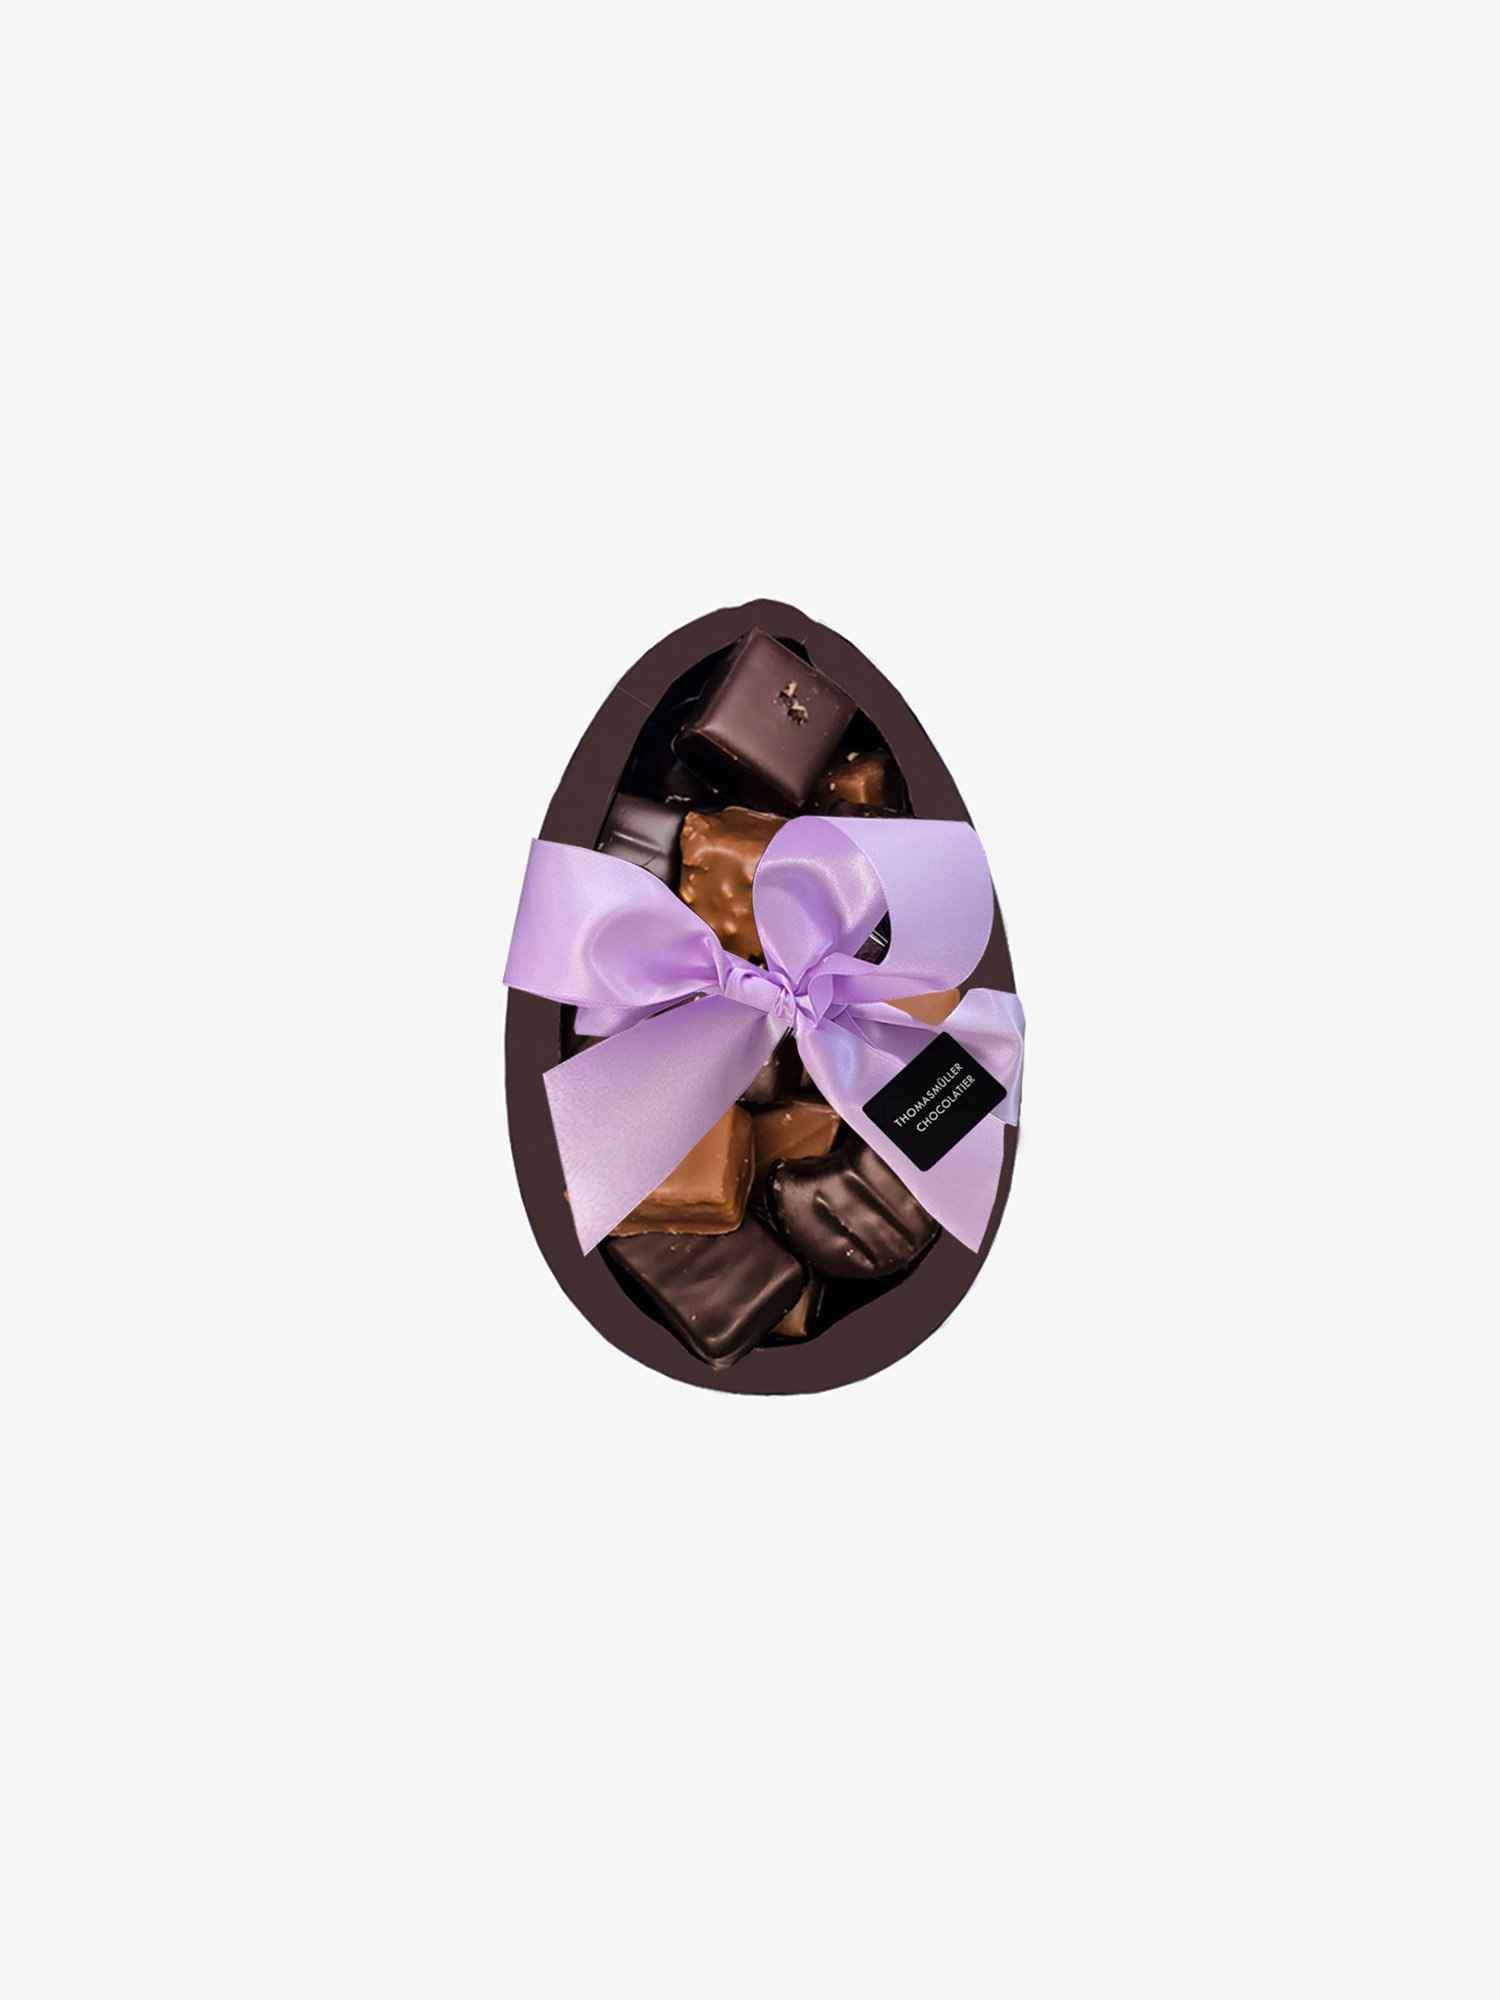 Discover Easter Eggs online - Thomas Müller Chocolatier